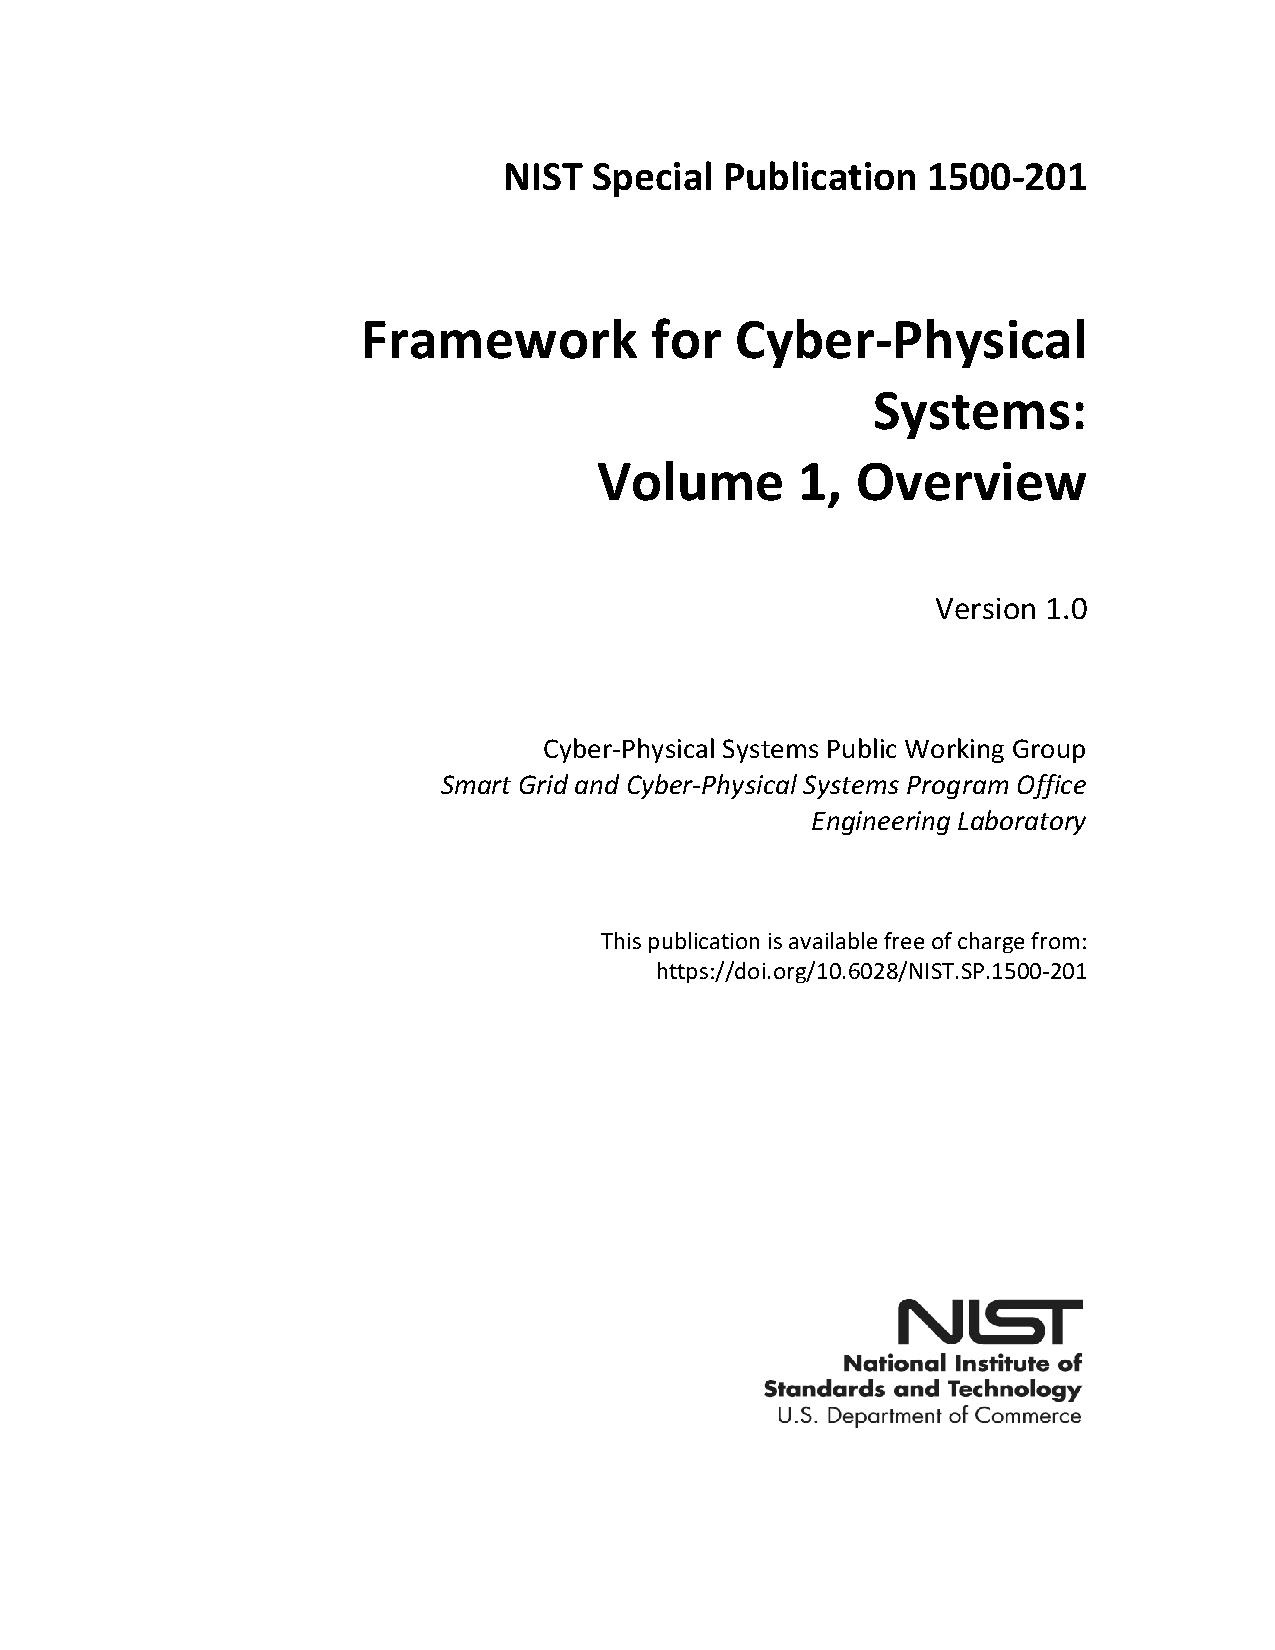 Framework for Cyber-Physical Systems